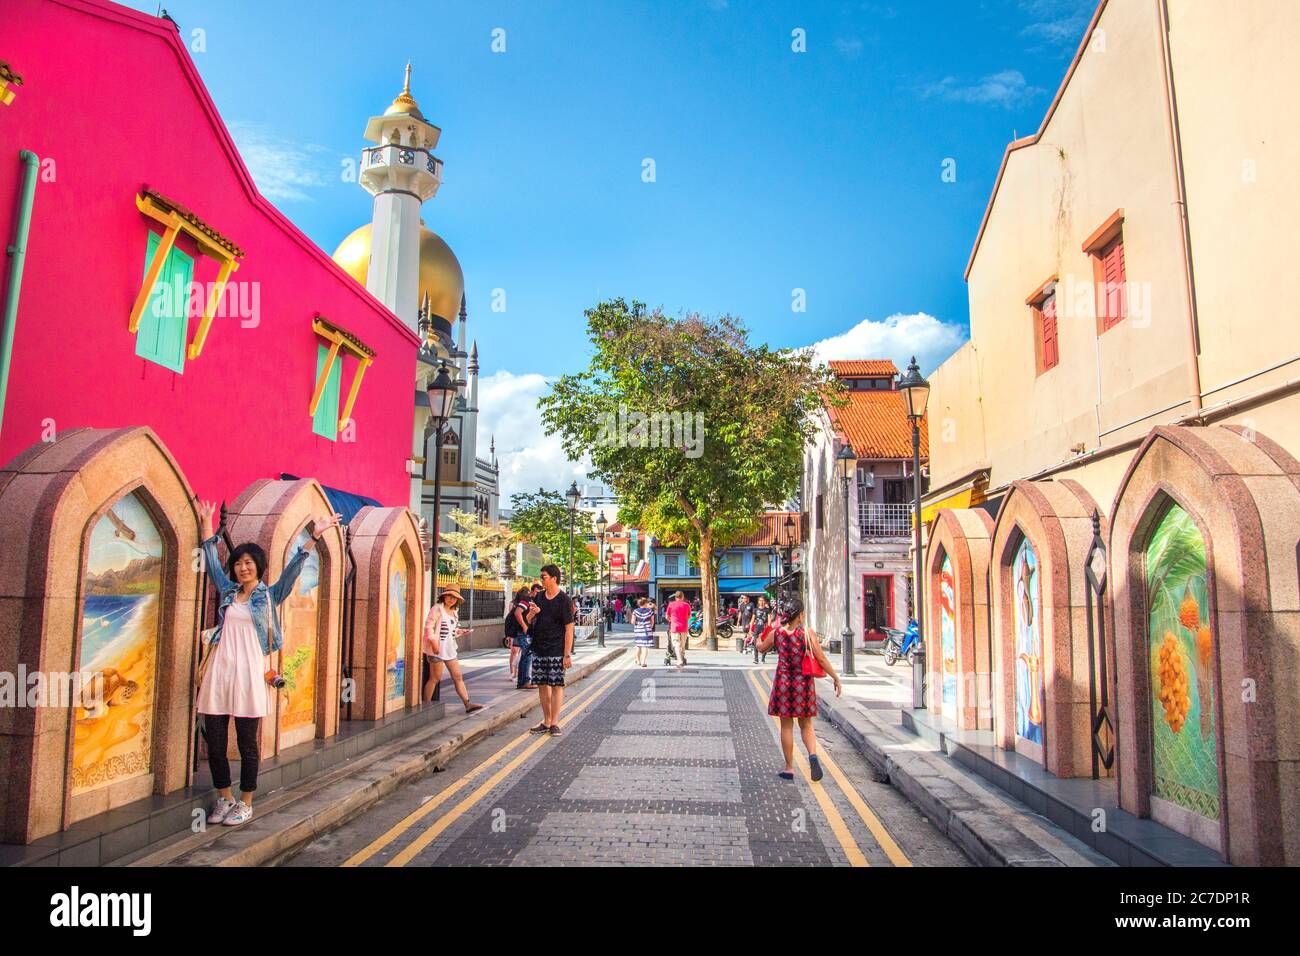 tourists walking in the famous colourful streets of Sultan Mosque (Masjid Sultan)  area,kampong glam,Singapore,asia,PRADEEP SUBRAMANIAN Stock Photo